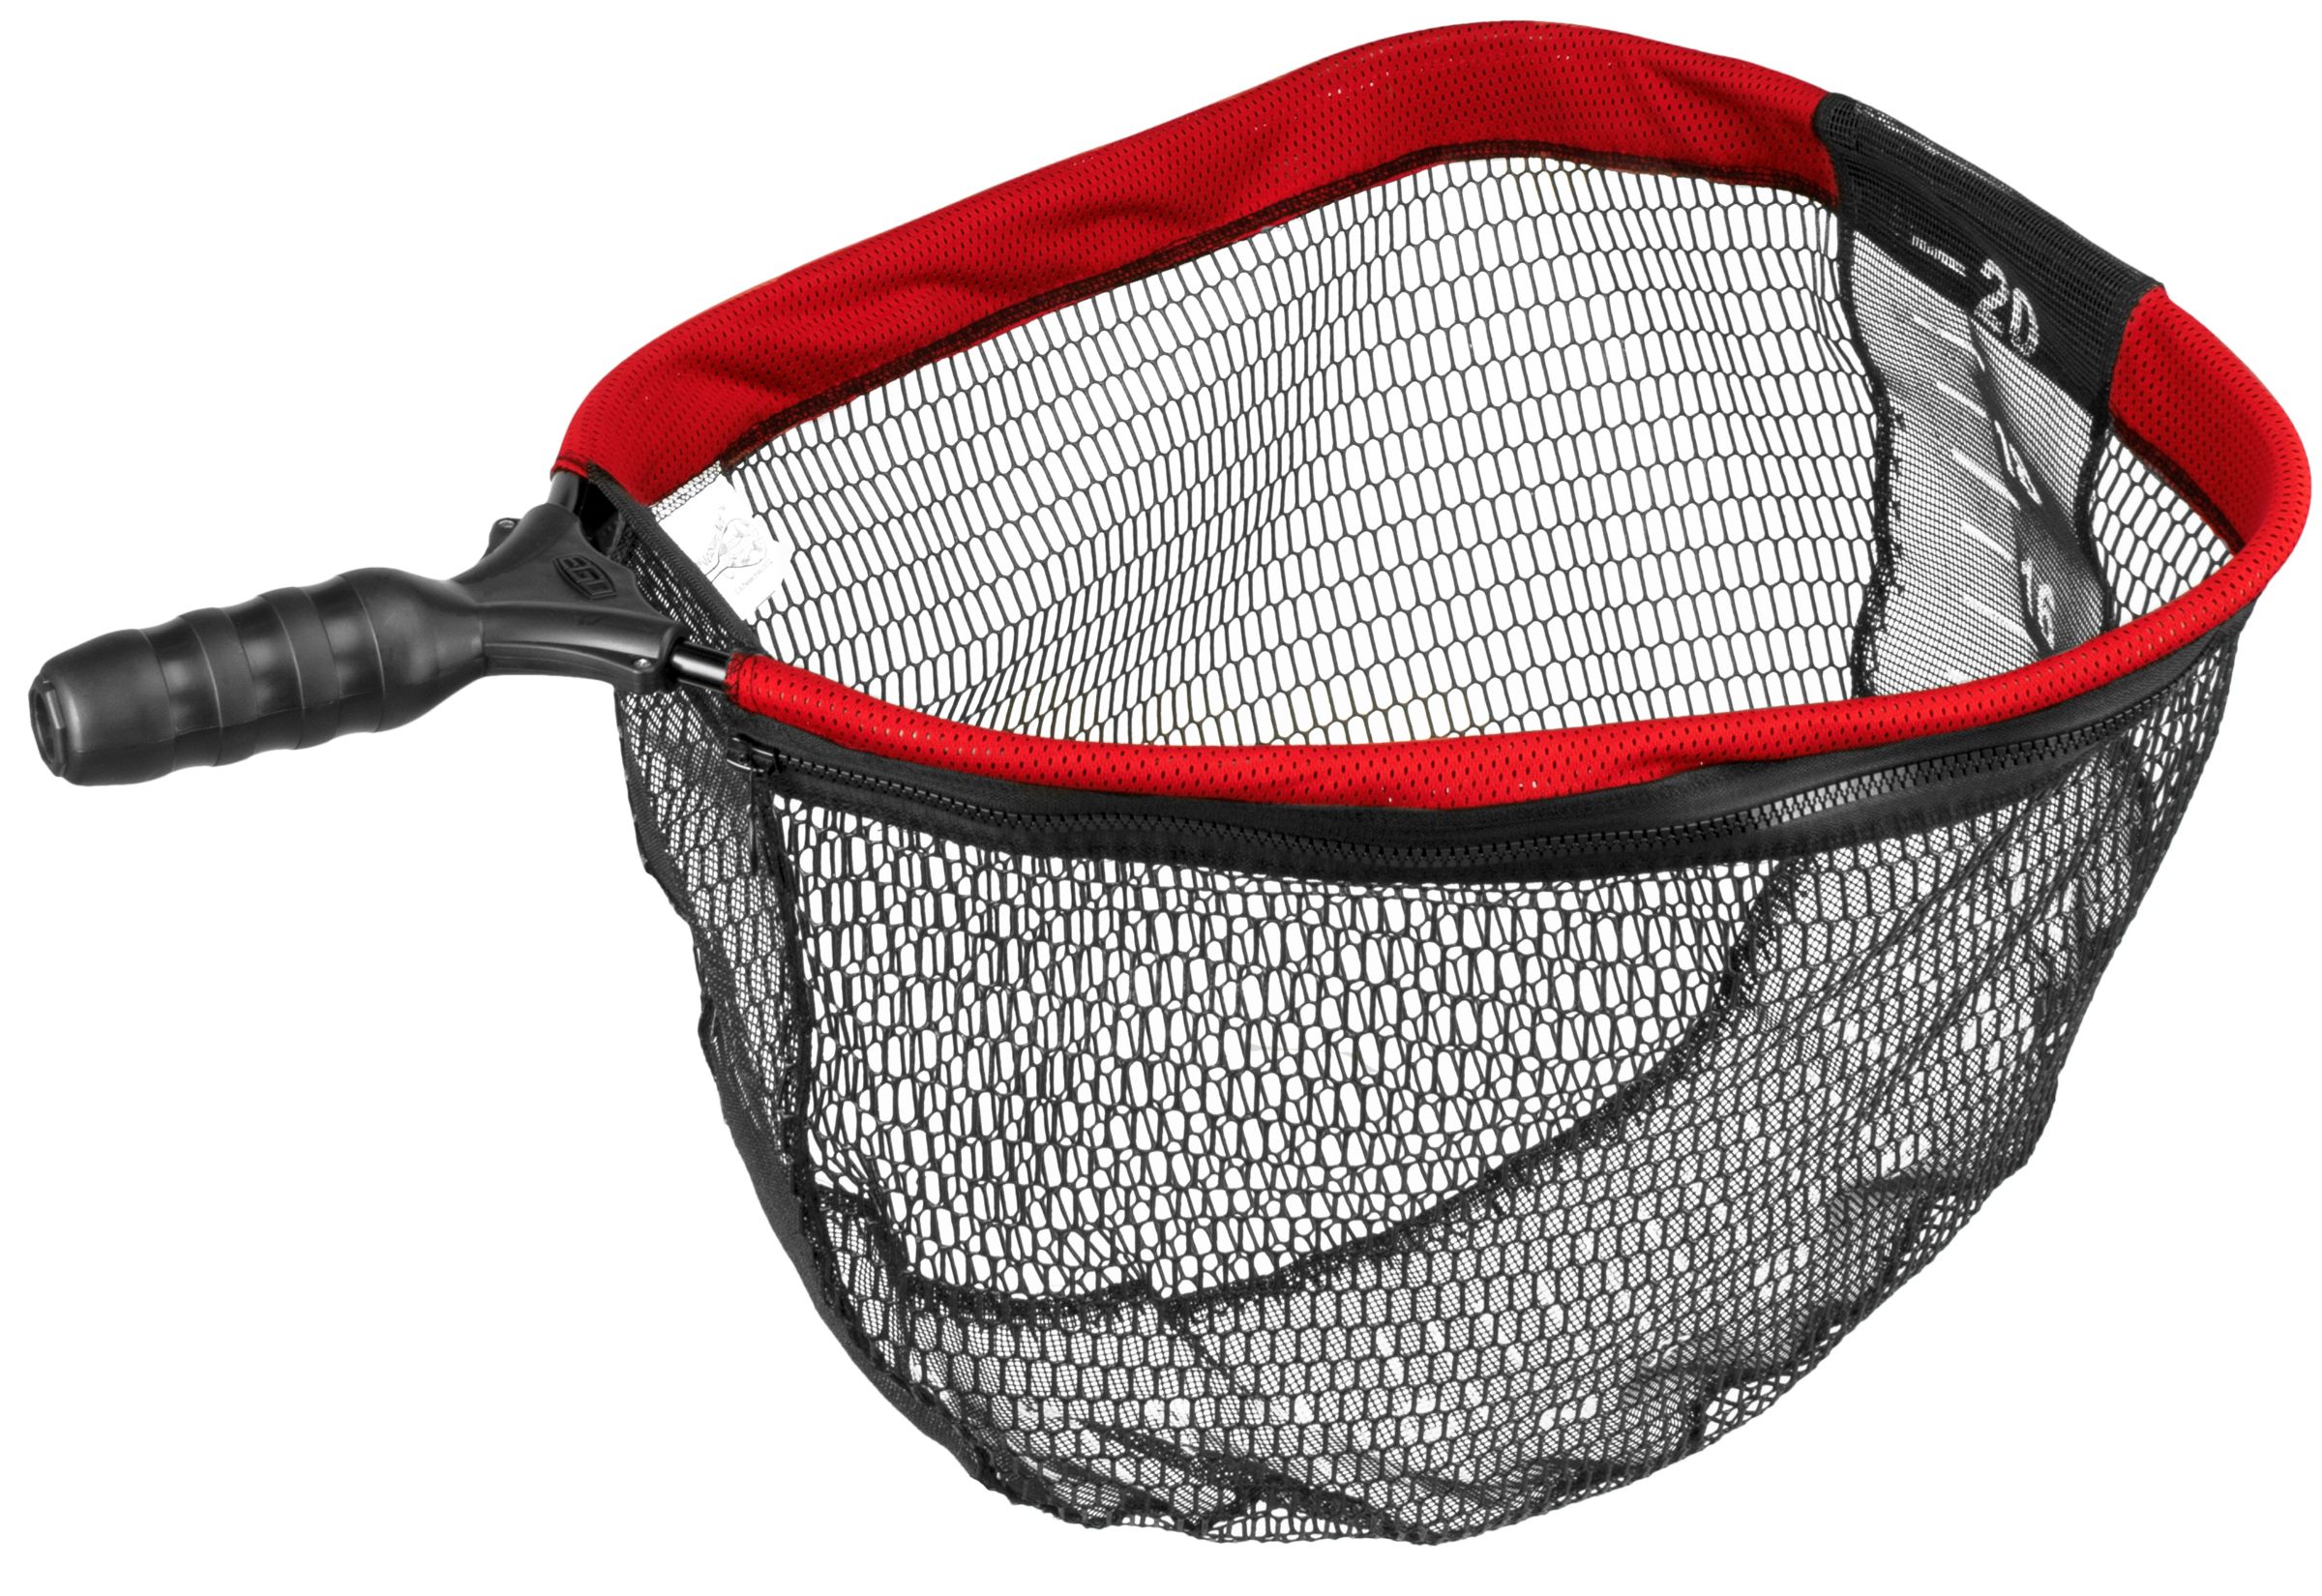 EGO Fishing S2 Large Guide Net Head 72059A with Free S&H — CampSaver